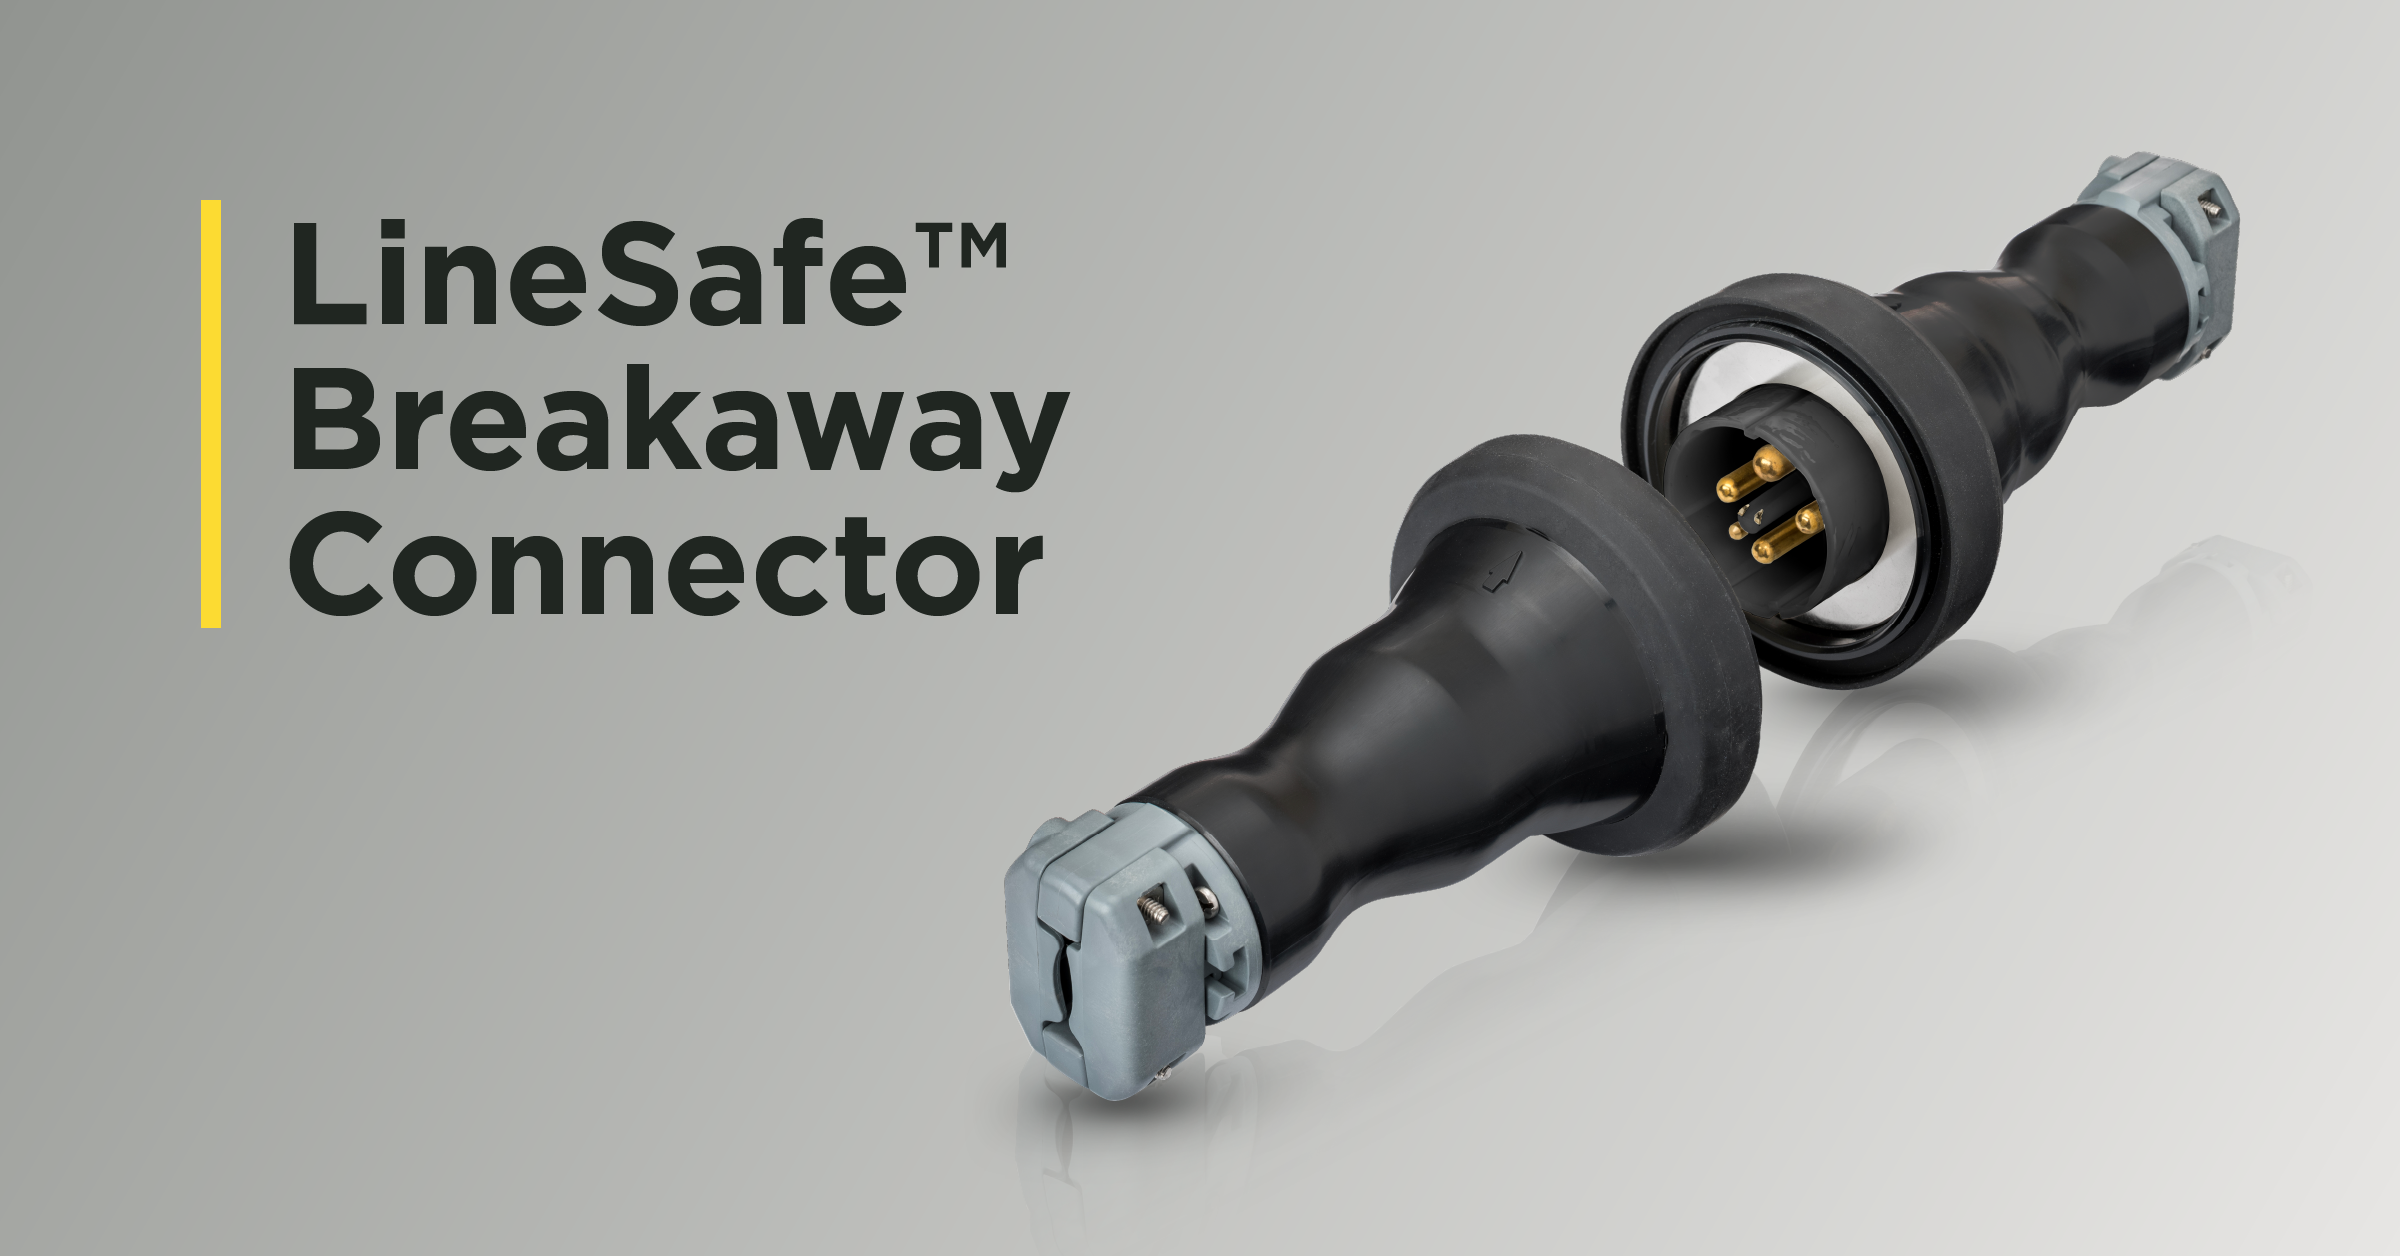 Revolutionize Electrical Safety with Hubbell's LineSafe™ Breakaway Connector